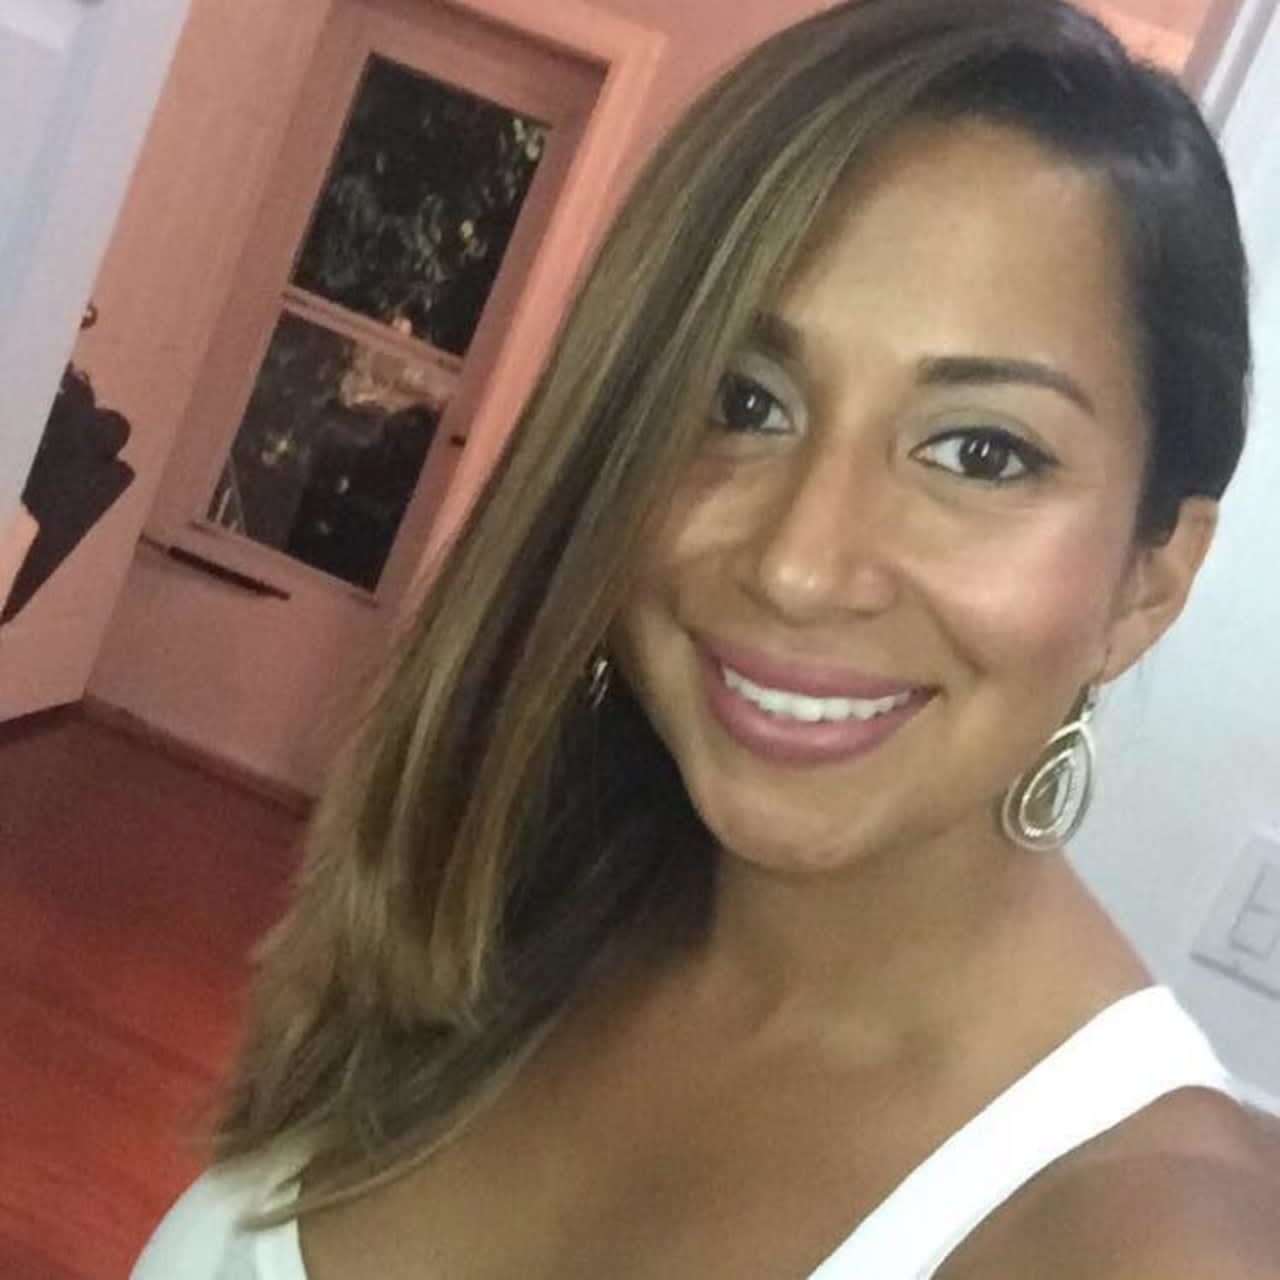 Adriana Riano of North Bergen died in a Jersey City crash Sunday, authorities said.